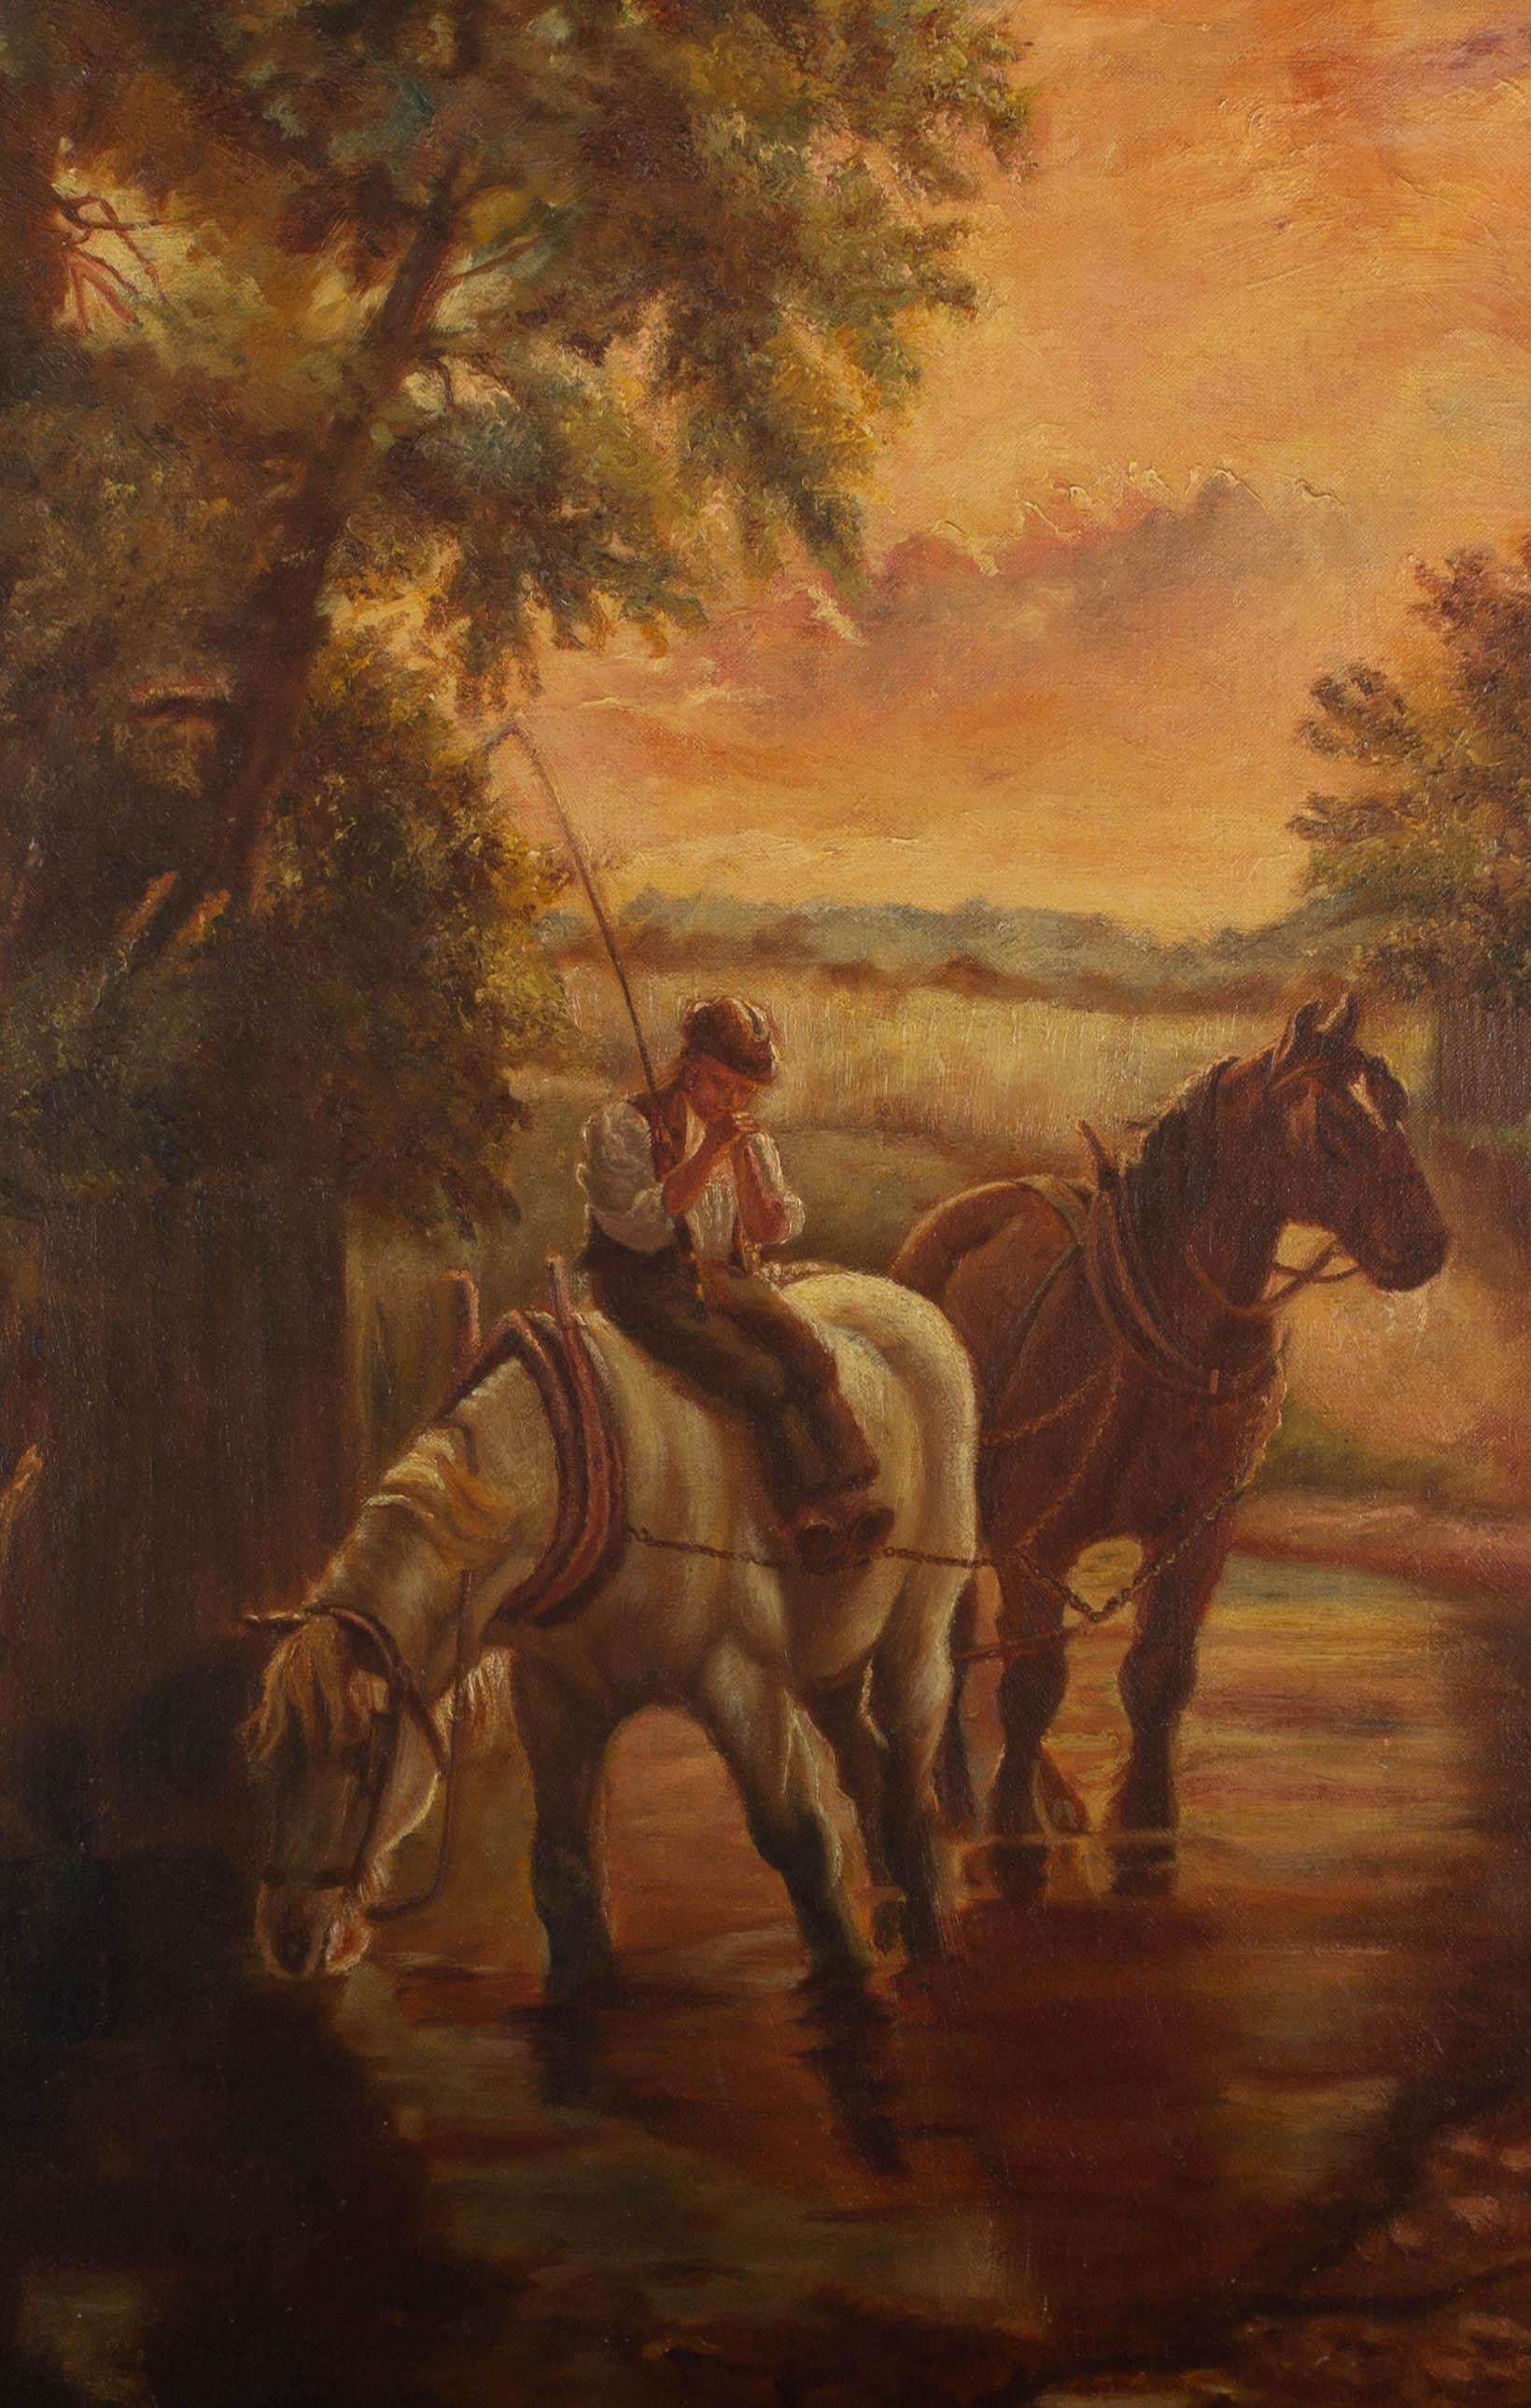 Unknown Figurative Painting - Early 20th Century Oil - Resting the Horses